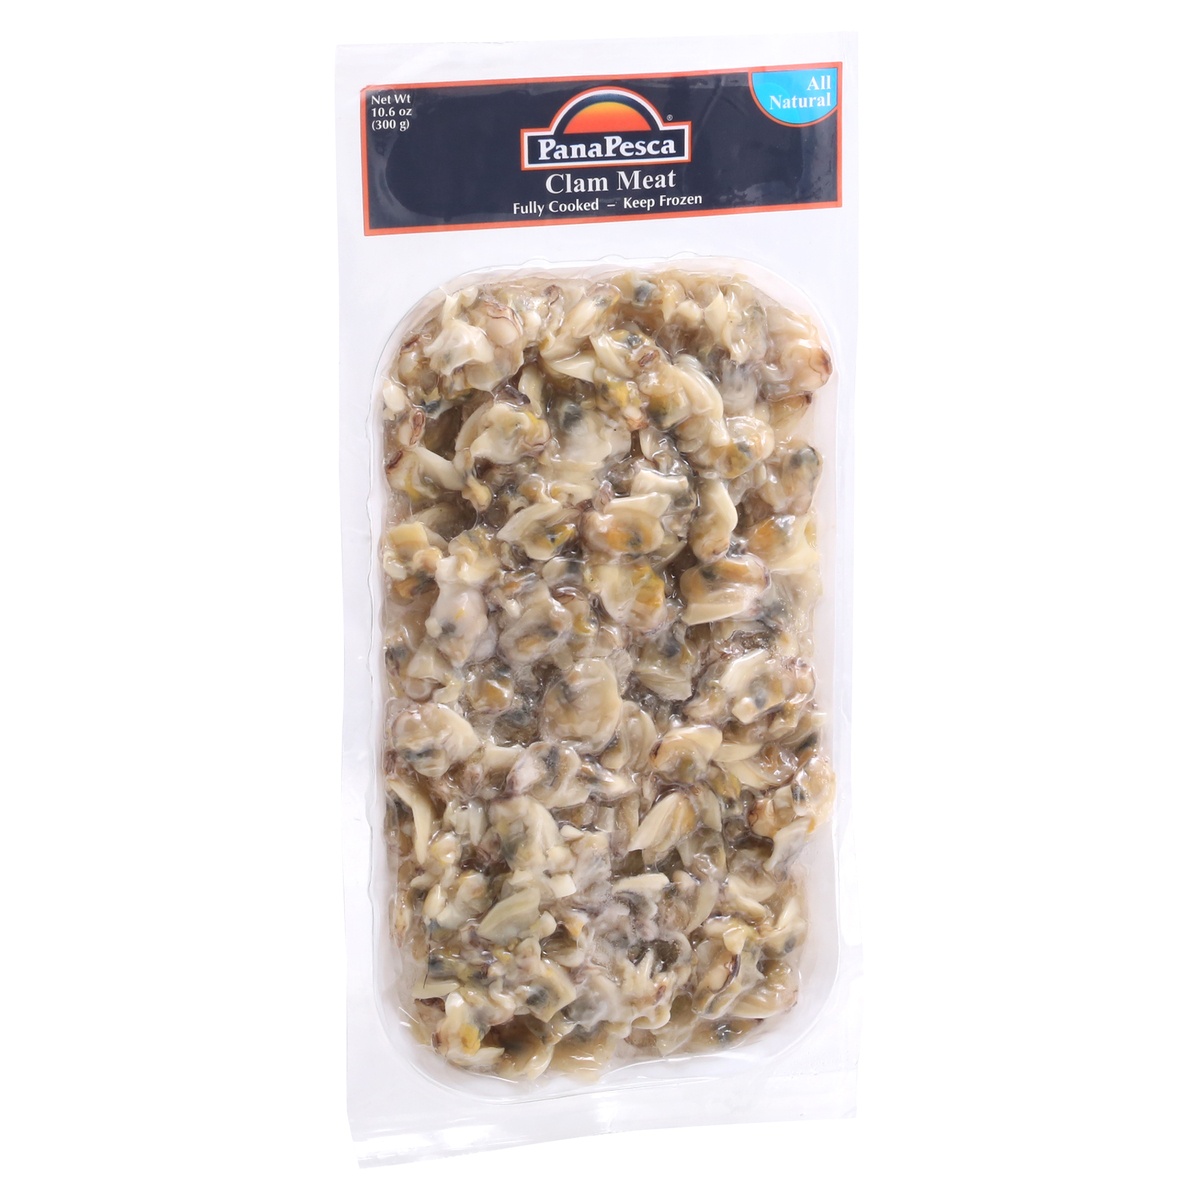 slide 2 of 9, PanaPesca Pana Pesca Clam Meat Skin Pack, 10.6 oz